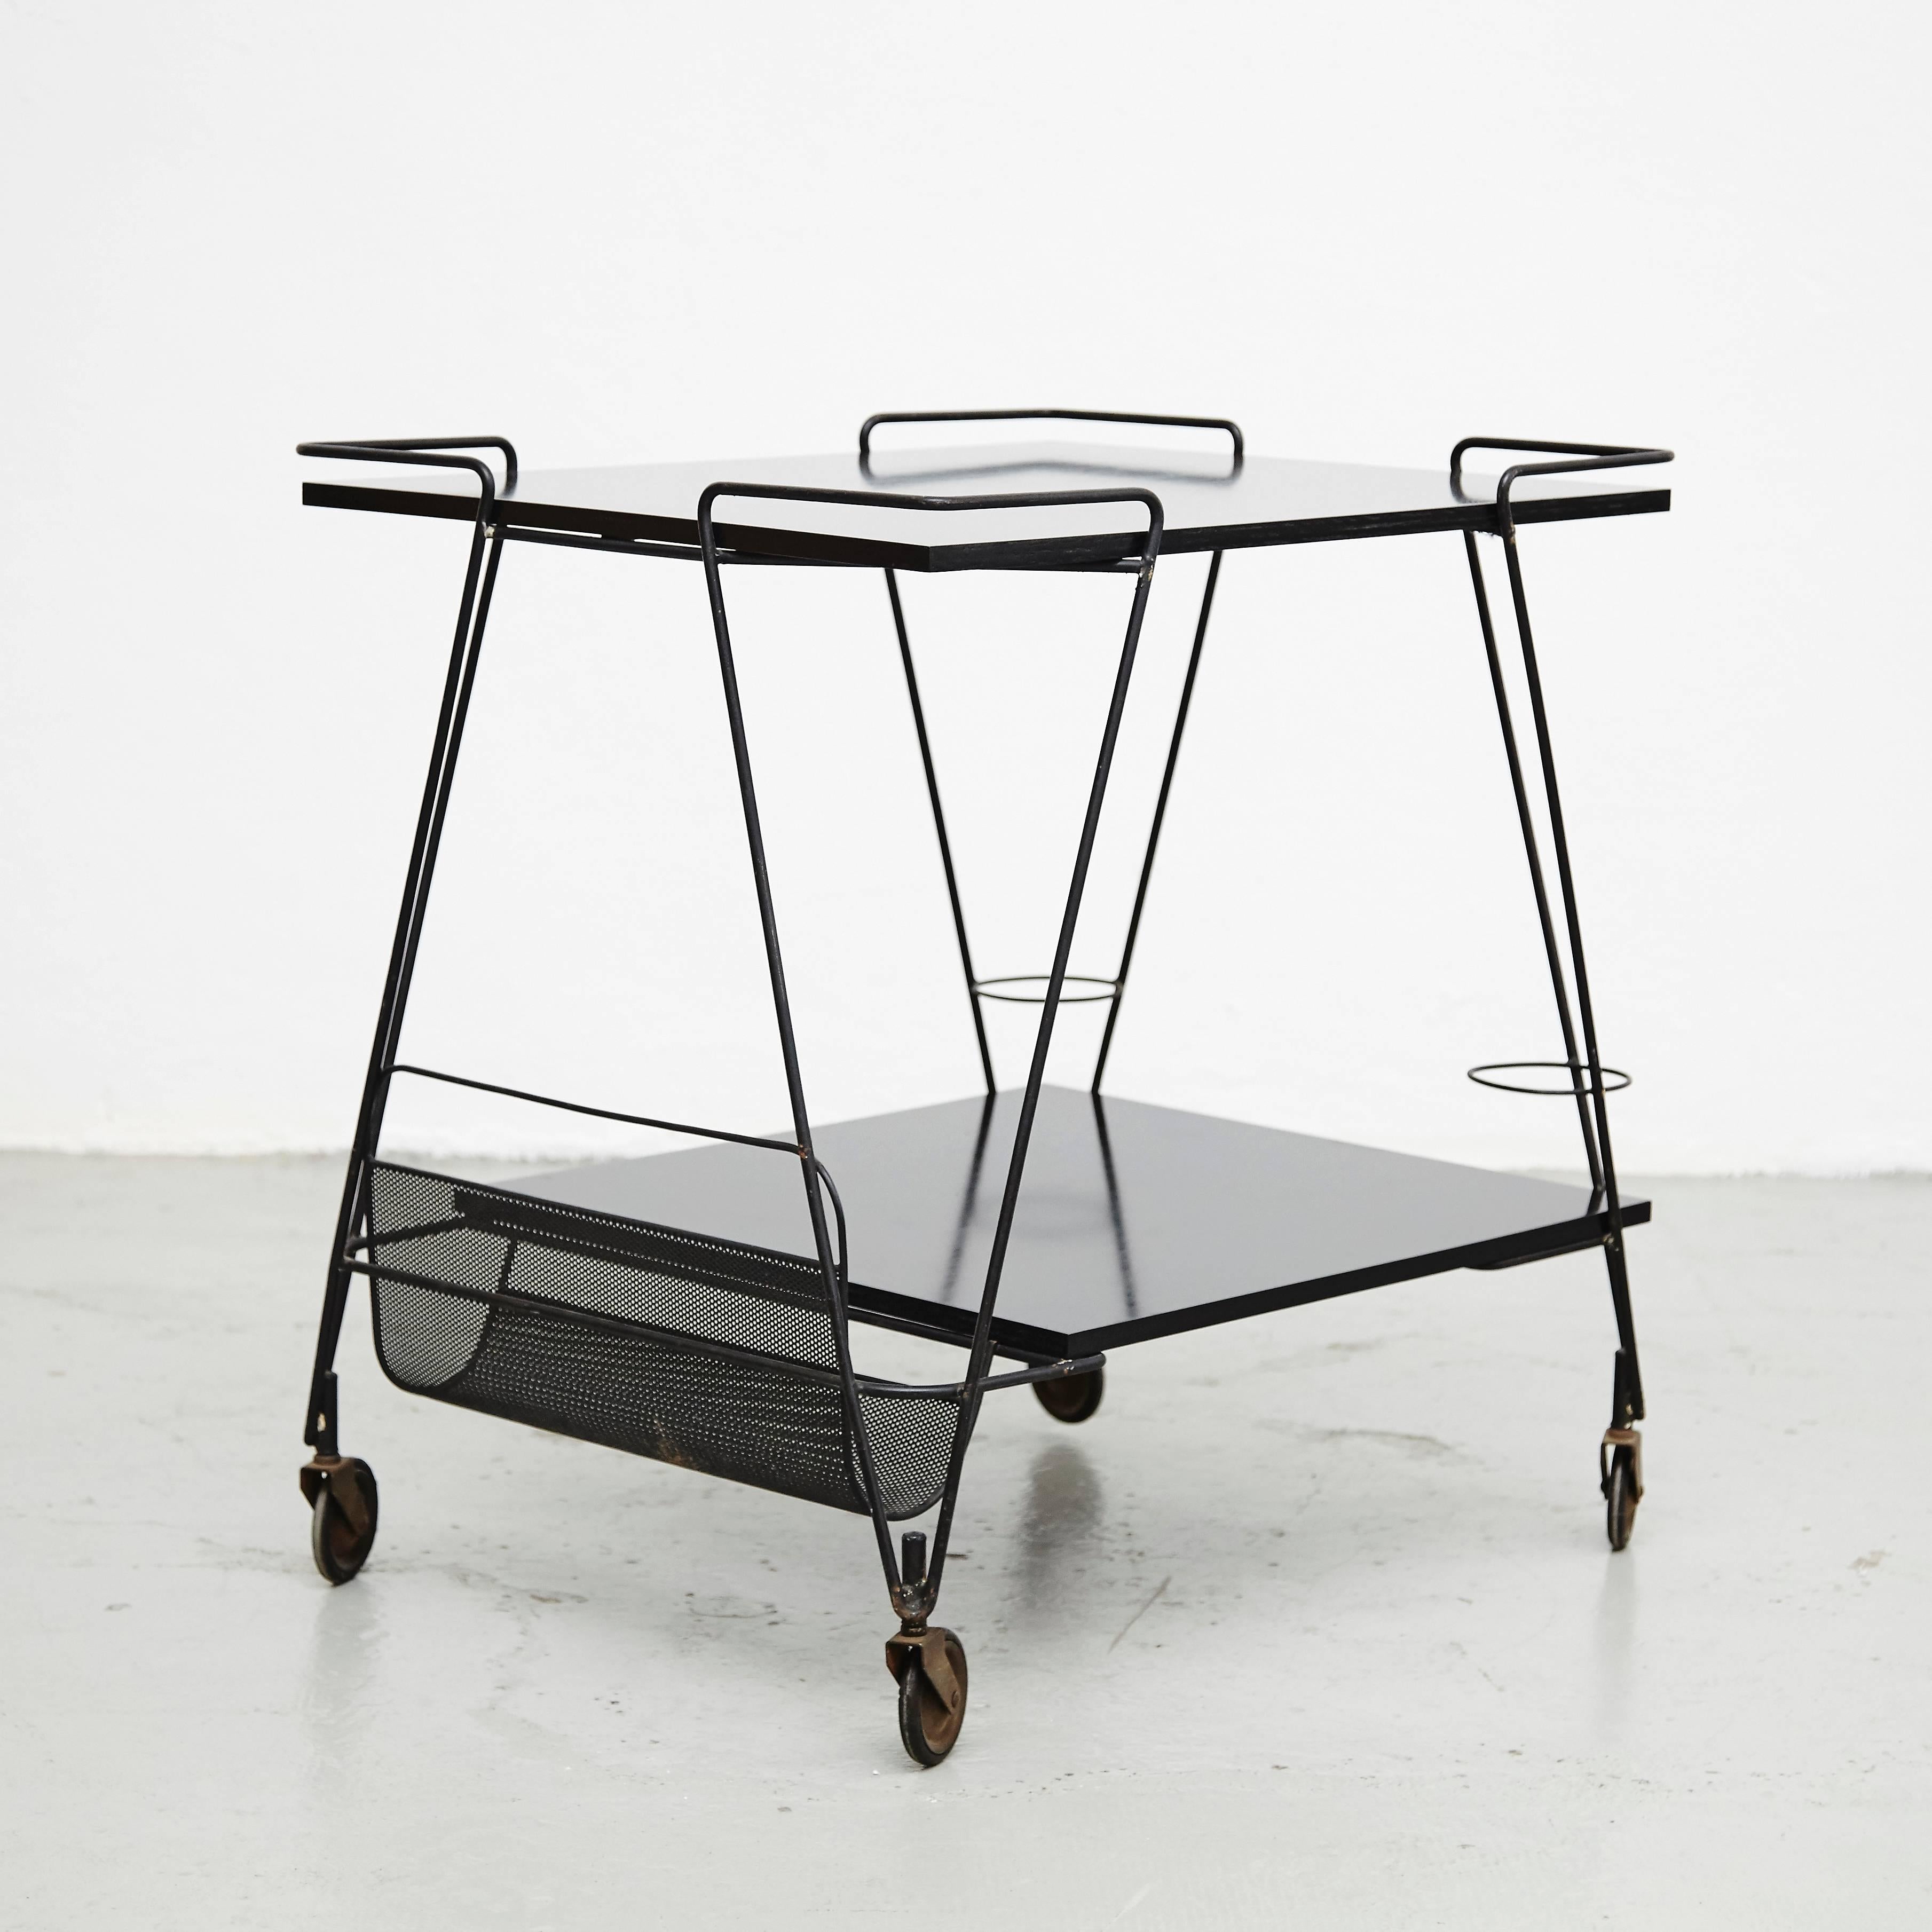 Trolley designed by Mathieu Matégot.
Manufactured by Ateliers Matégot (France), circa 1950.
Perforated metal lacquered in black and laminated wood.

In good original condition, with minor wear consistent with age and use, preserving a beautiful